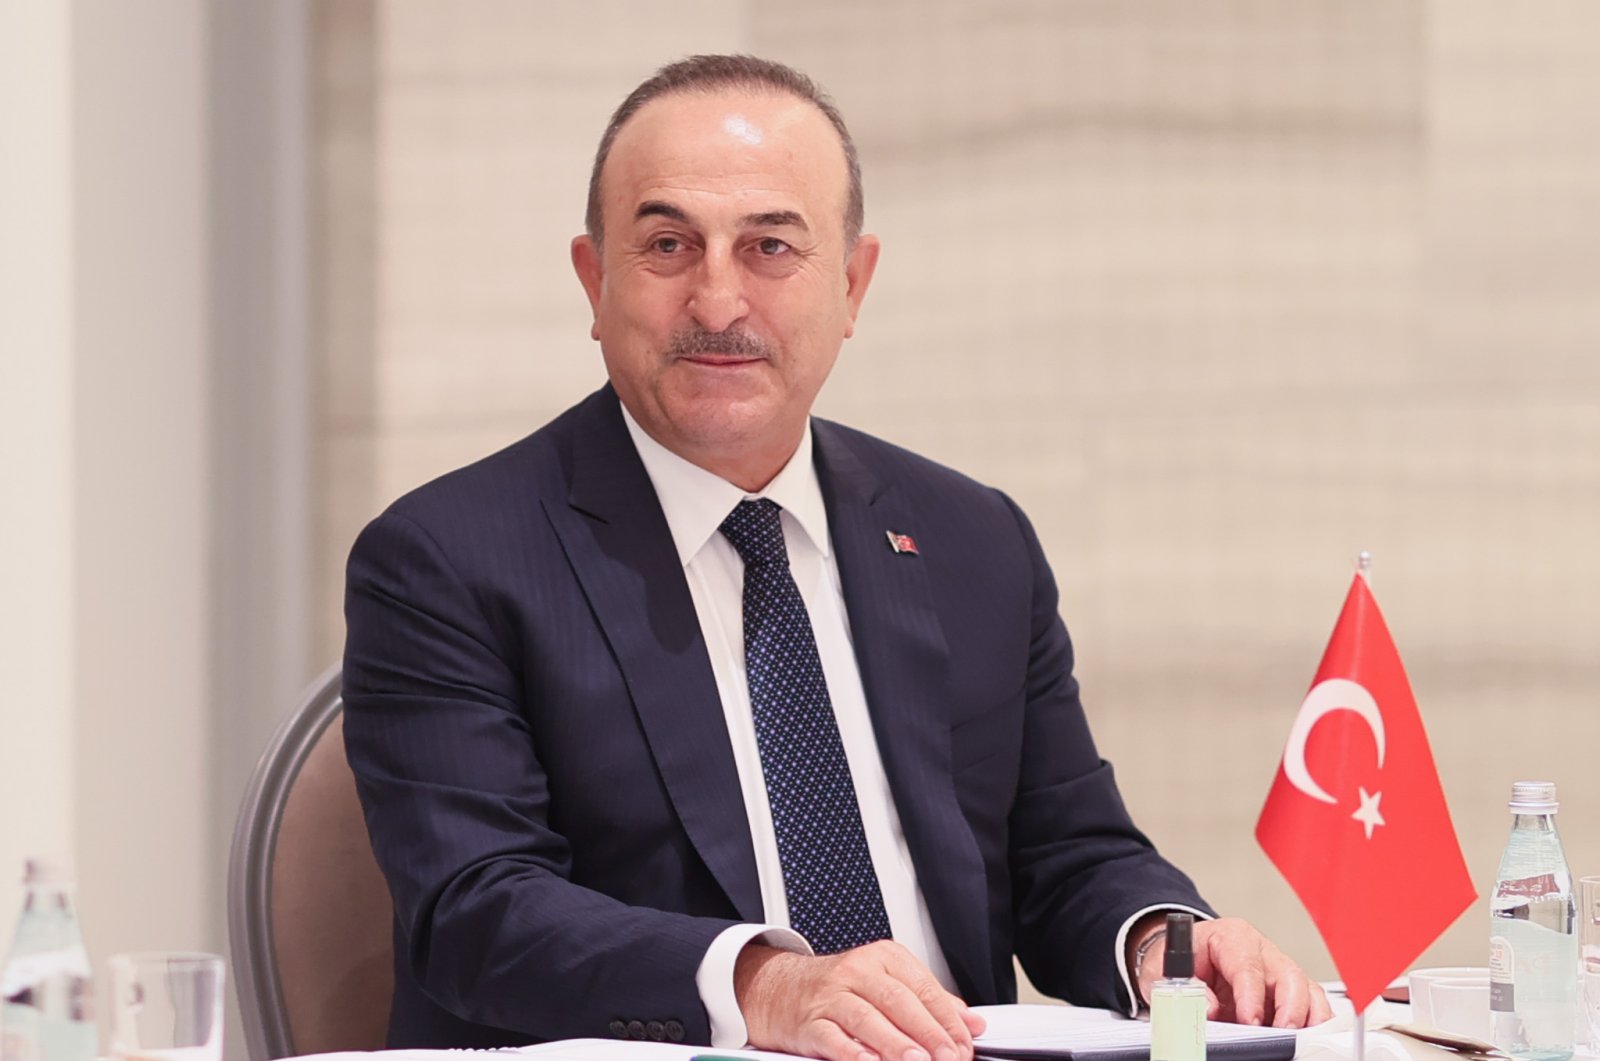 Turkish Foreign Minister Mevlüt Çavuşoğlu during the 77th U.N. General Assembly session meets with his counterparts in New York, U.S., Sept. 20, 2022. (AA Photo)